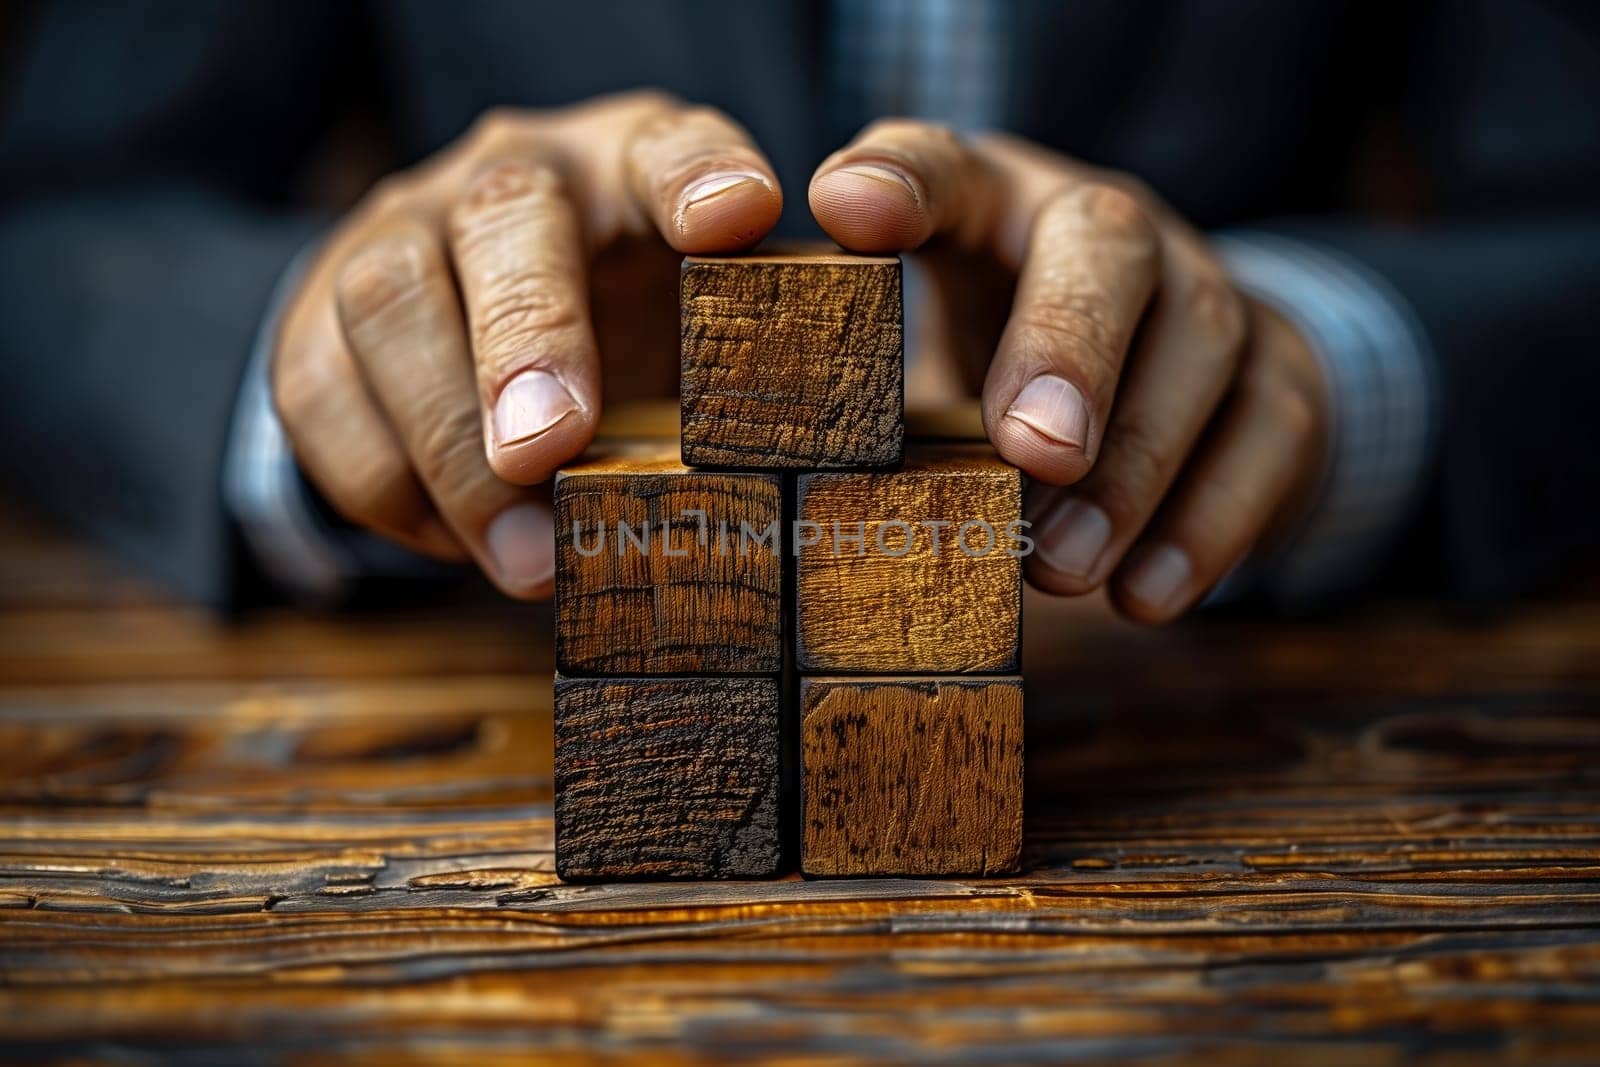 The mans gesture was delicate as he arranged the hardwood blocks on the table, his fingers and thumb stained with wood. The wooden blocks resembled a flooring pattern, a unique fashion accessory